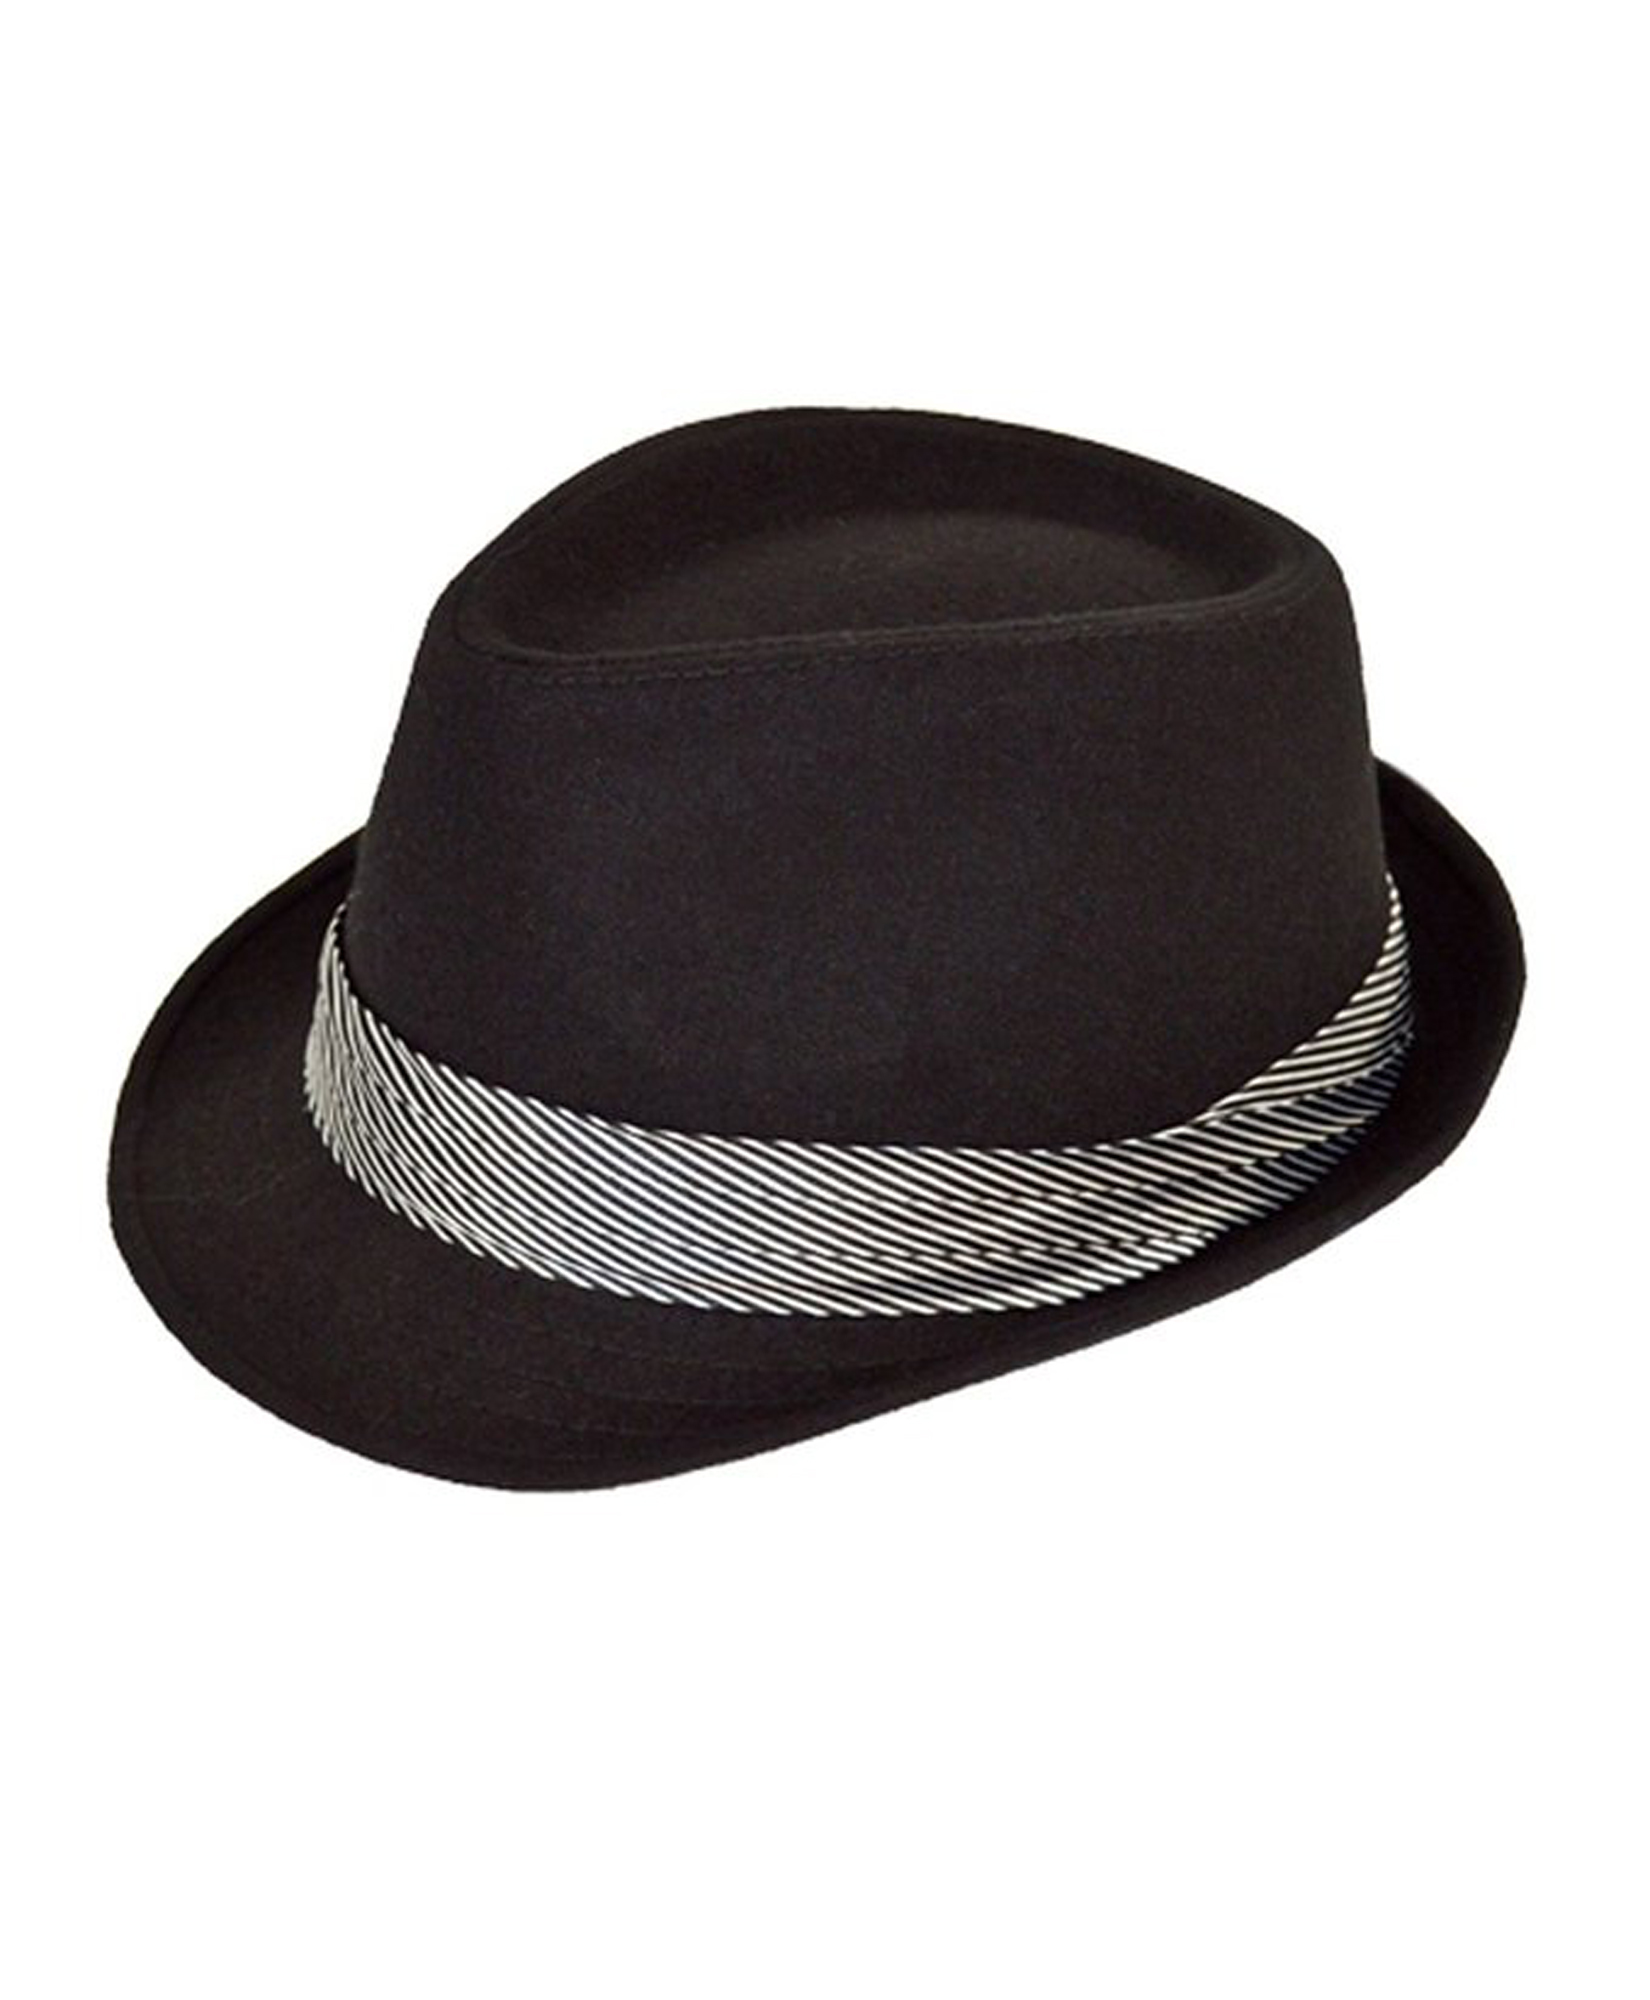 Men's Black Fedora Hat with Striped Banded